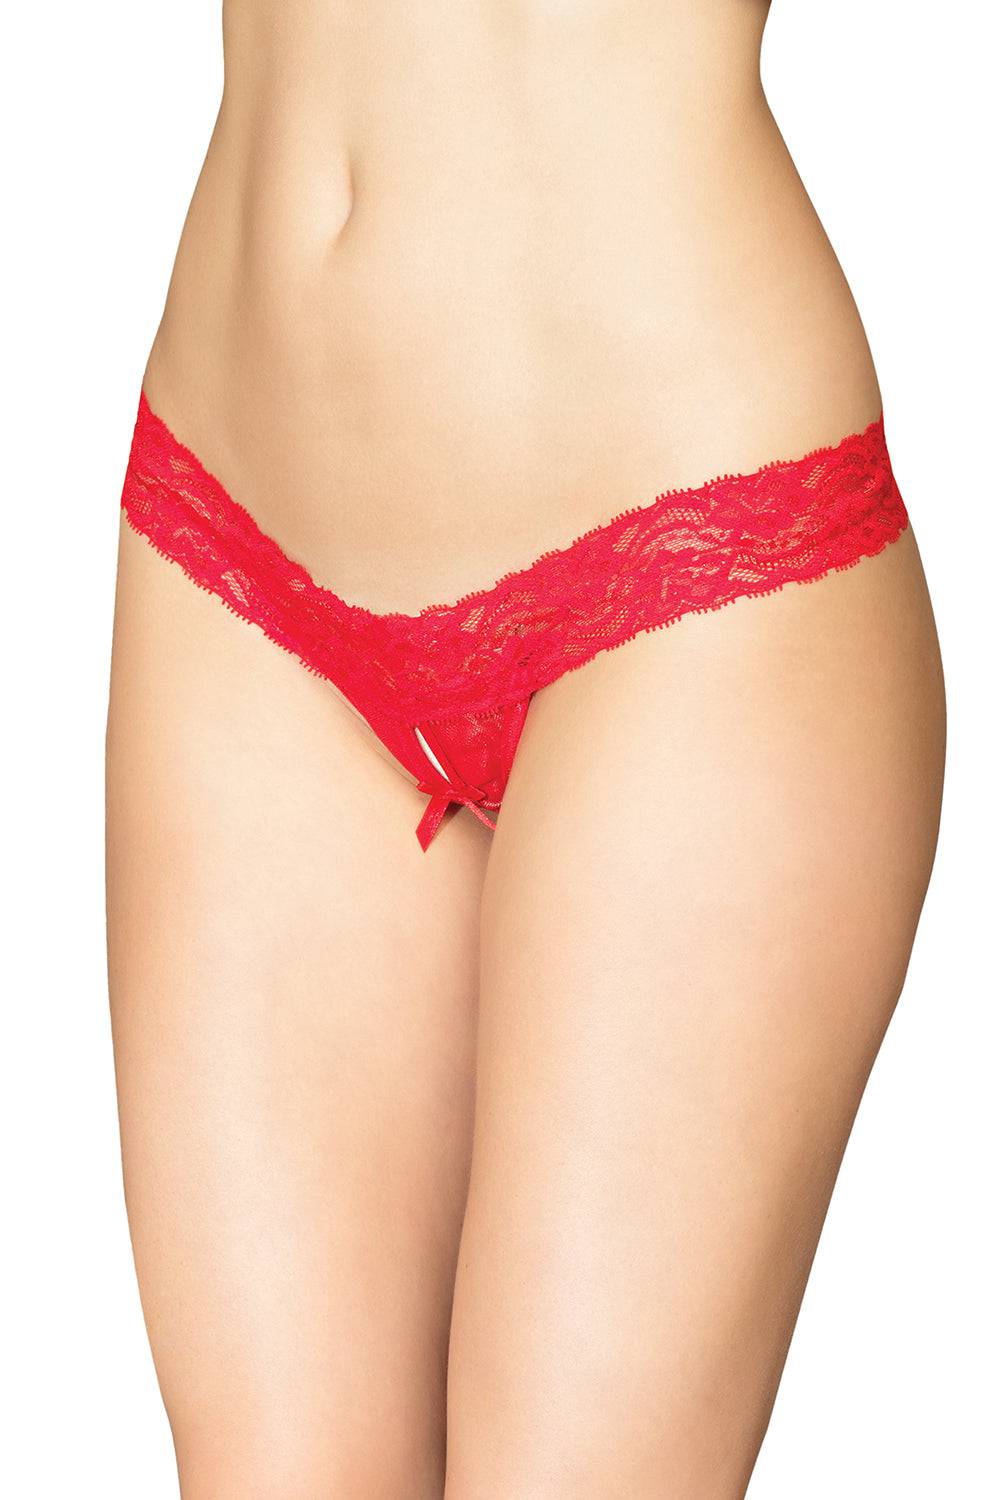 Coquette - 3736 - Crotchless Thong - Stag Shop